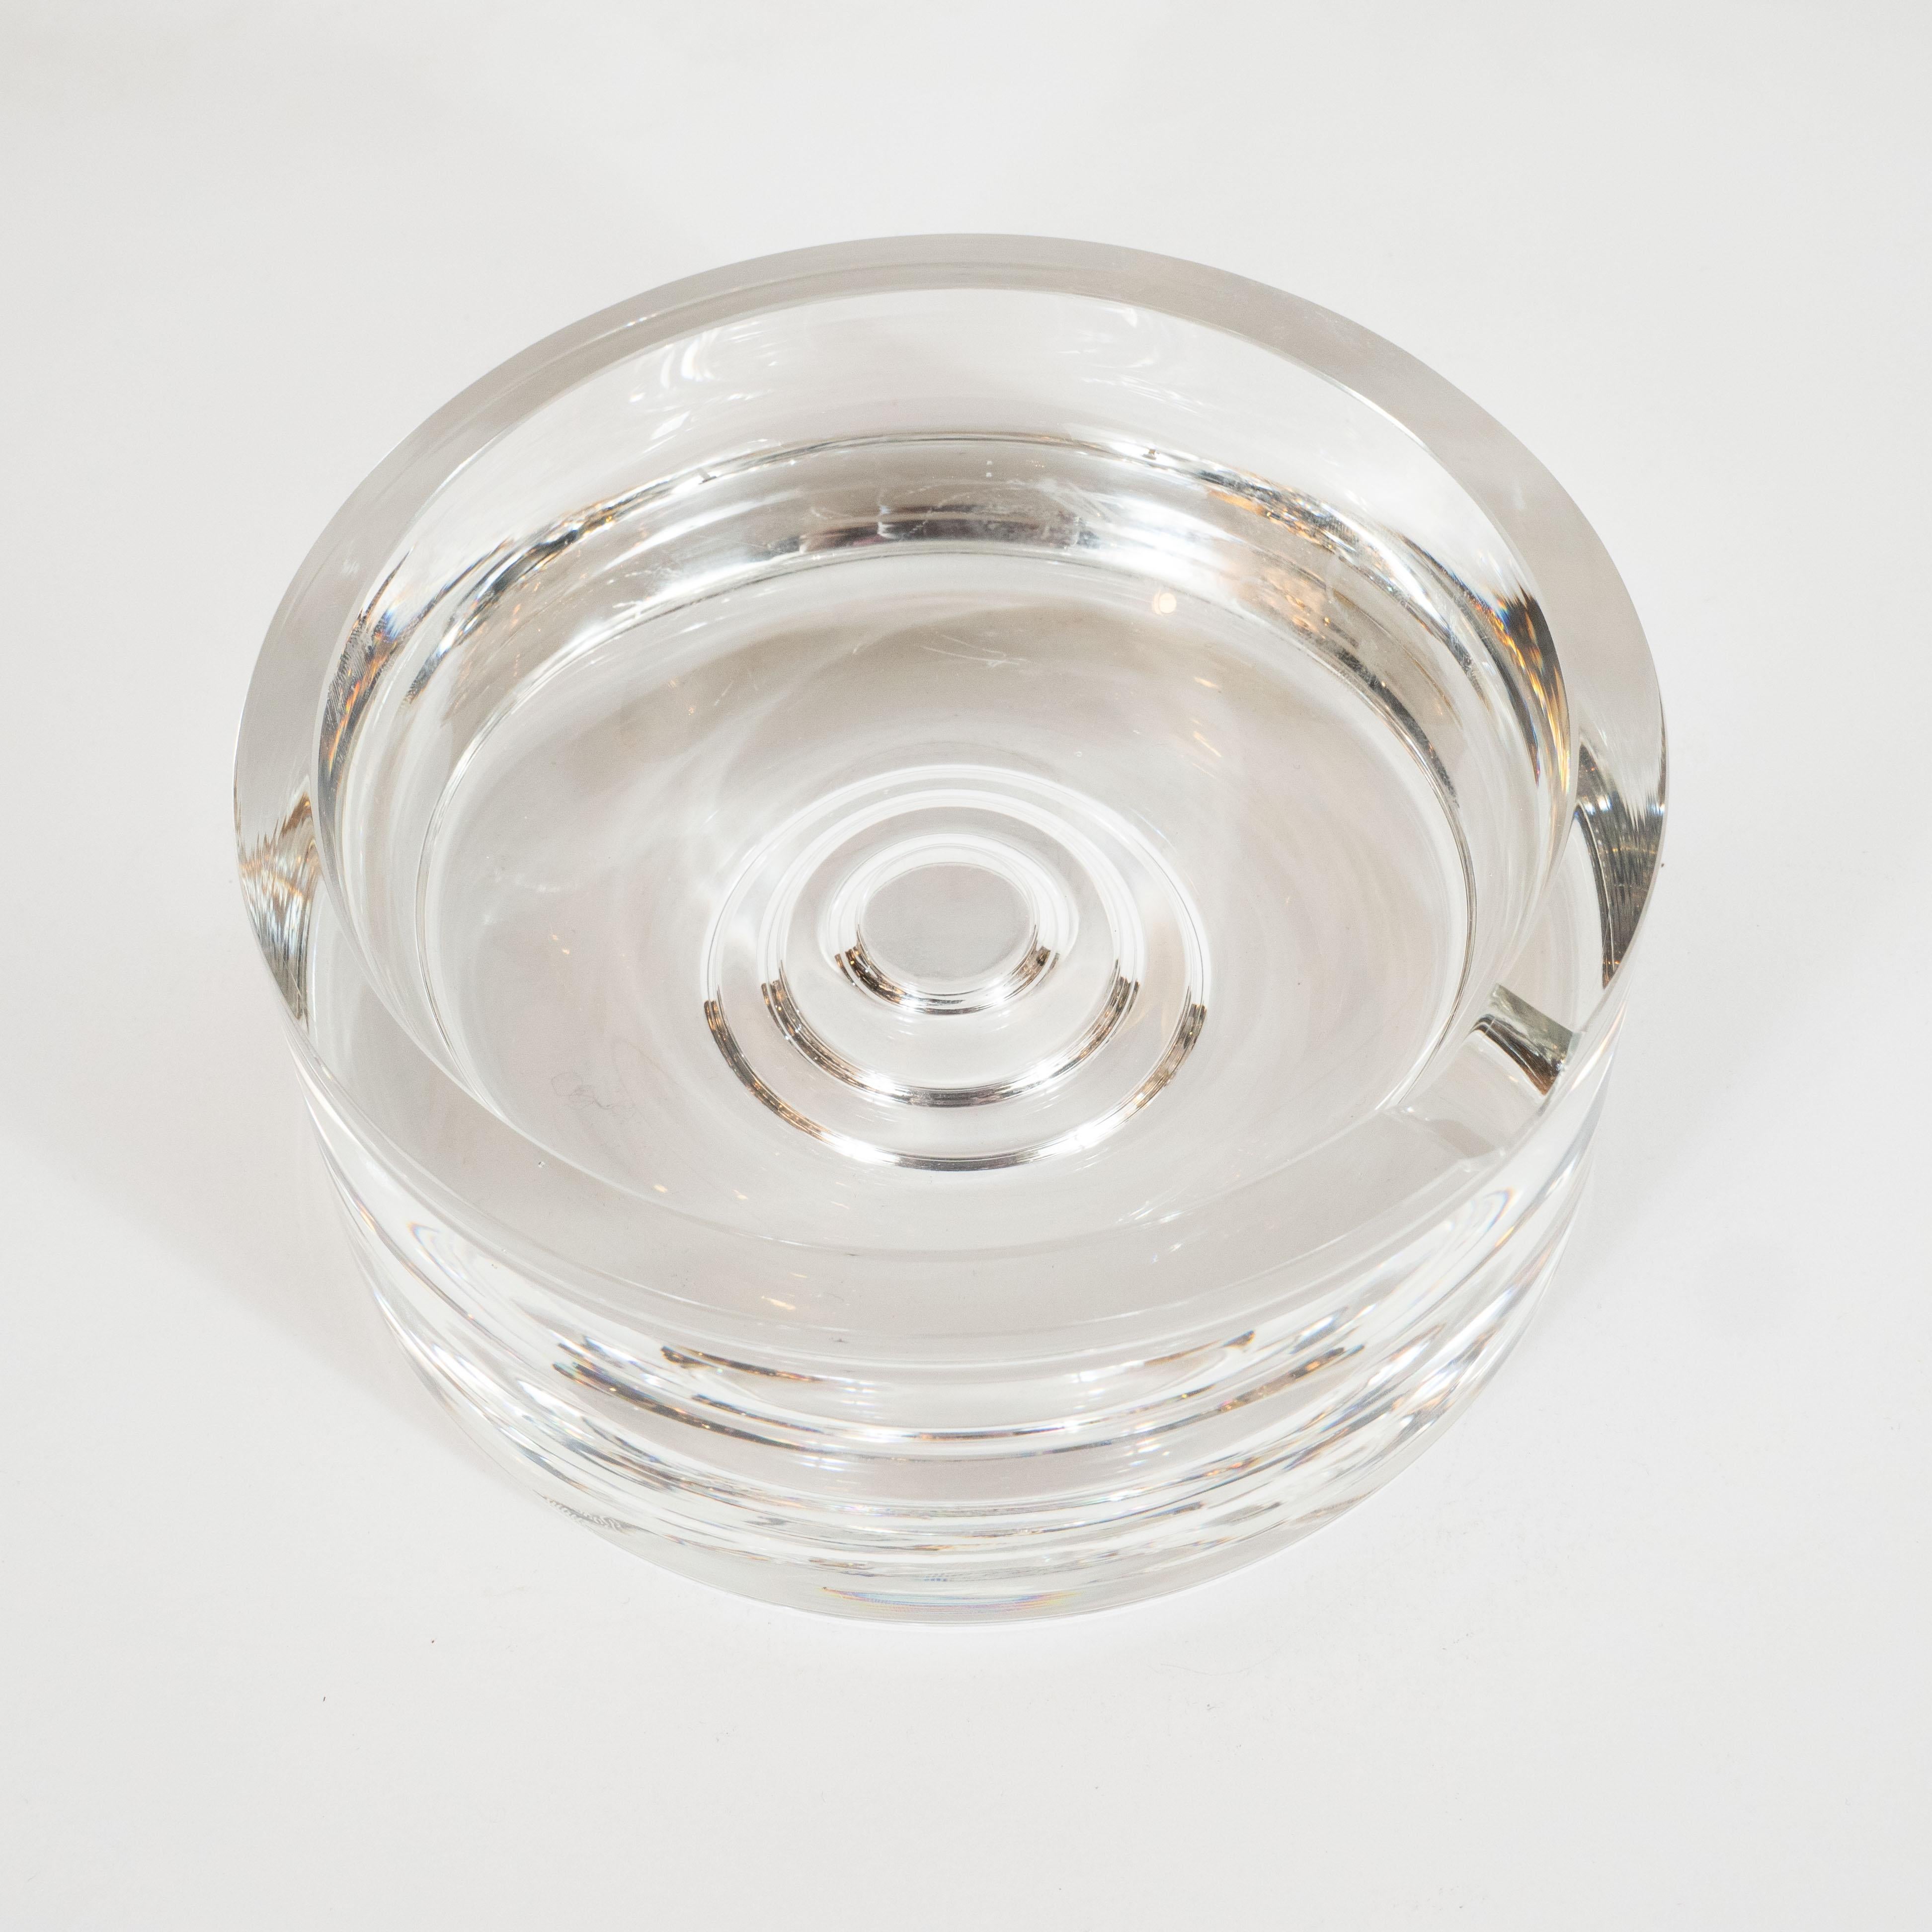 This elegant Mid-Century Modern ash tray was realized by Rosenthal- one of the world's premiere makers of crystal products- in Germany, circa 1970. IT features a circular form- a design motif that is reiterated in the recurring concentric shapes